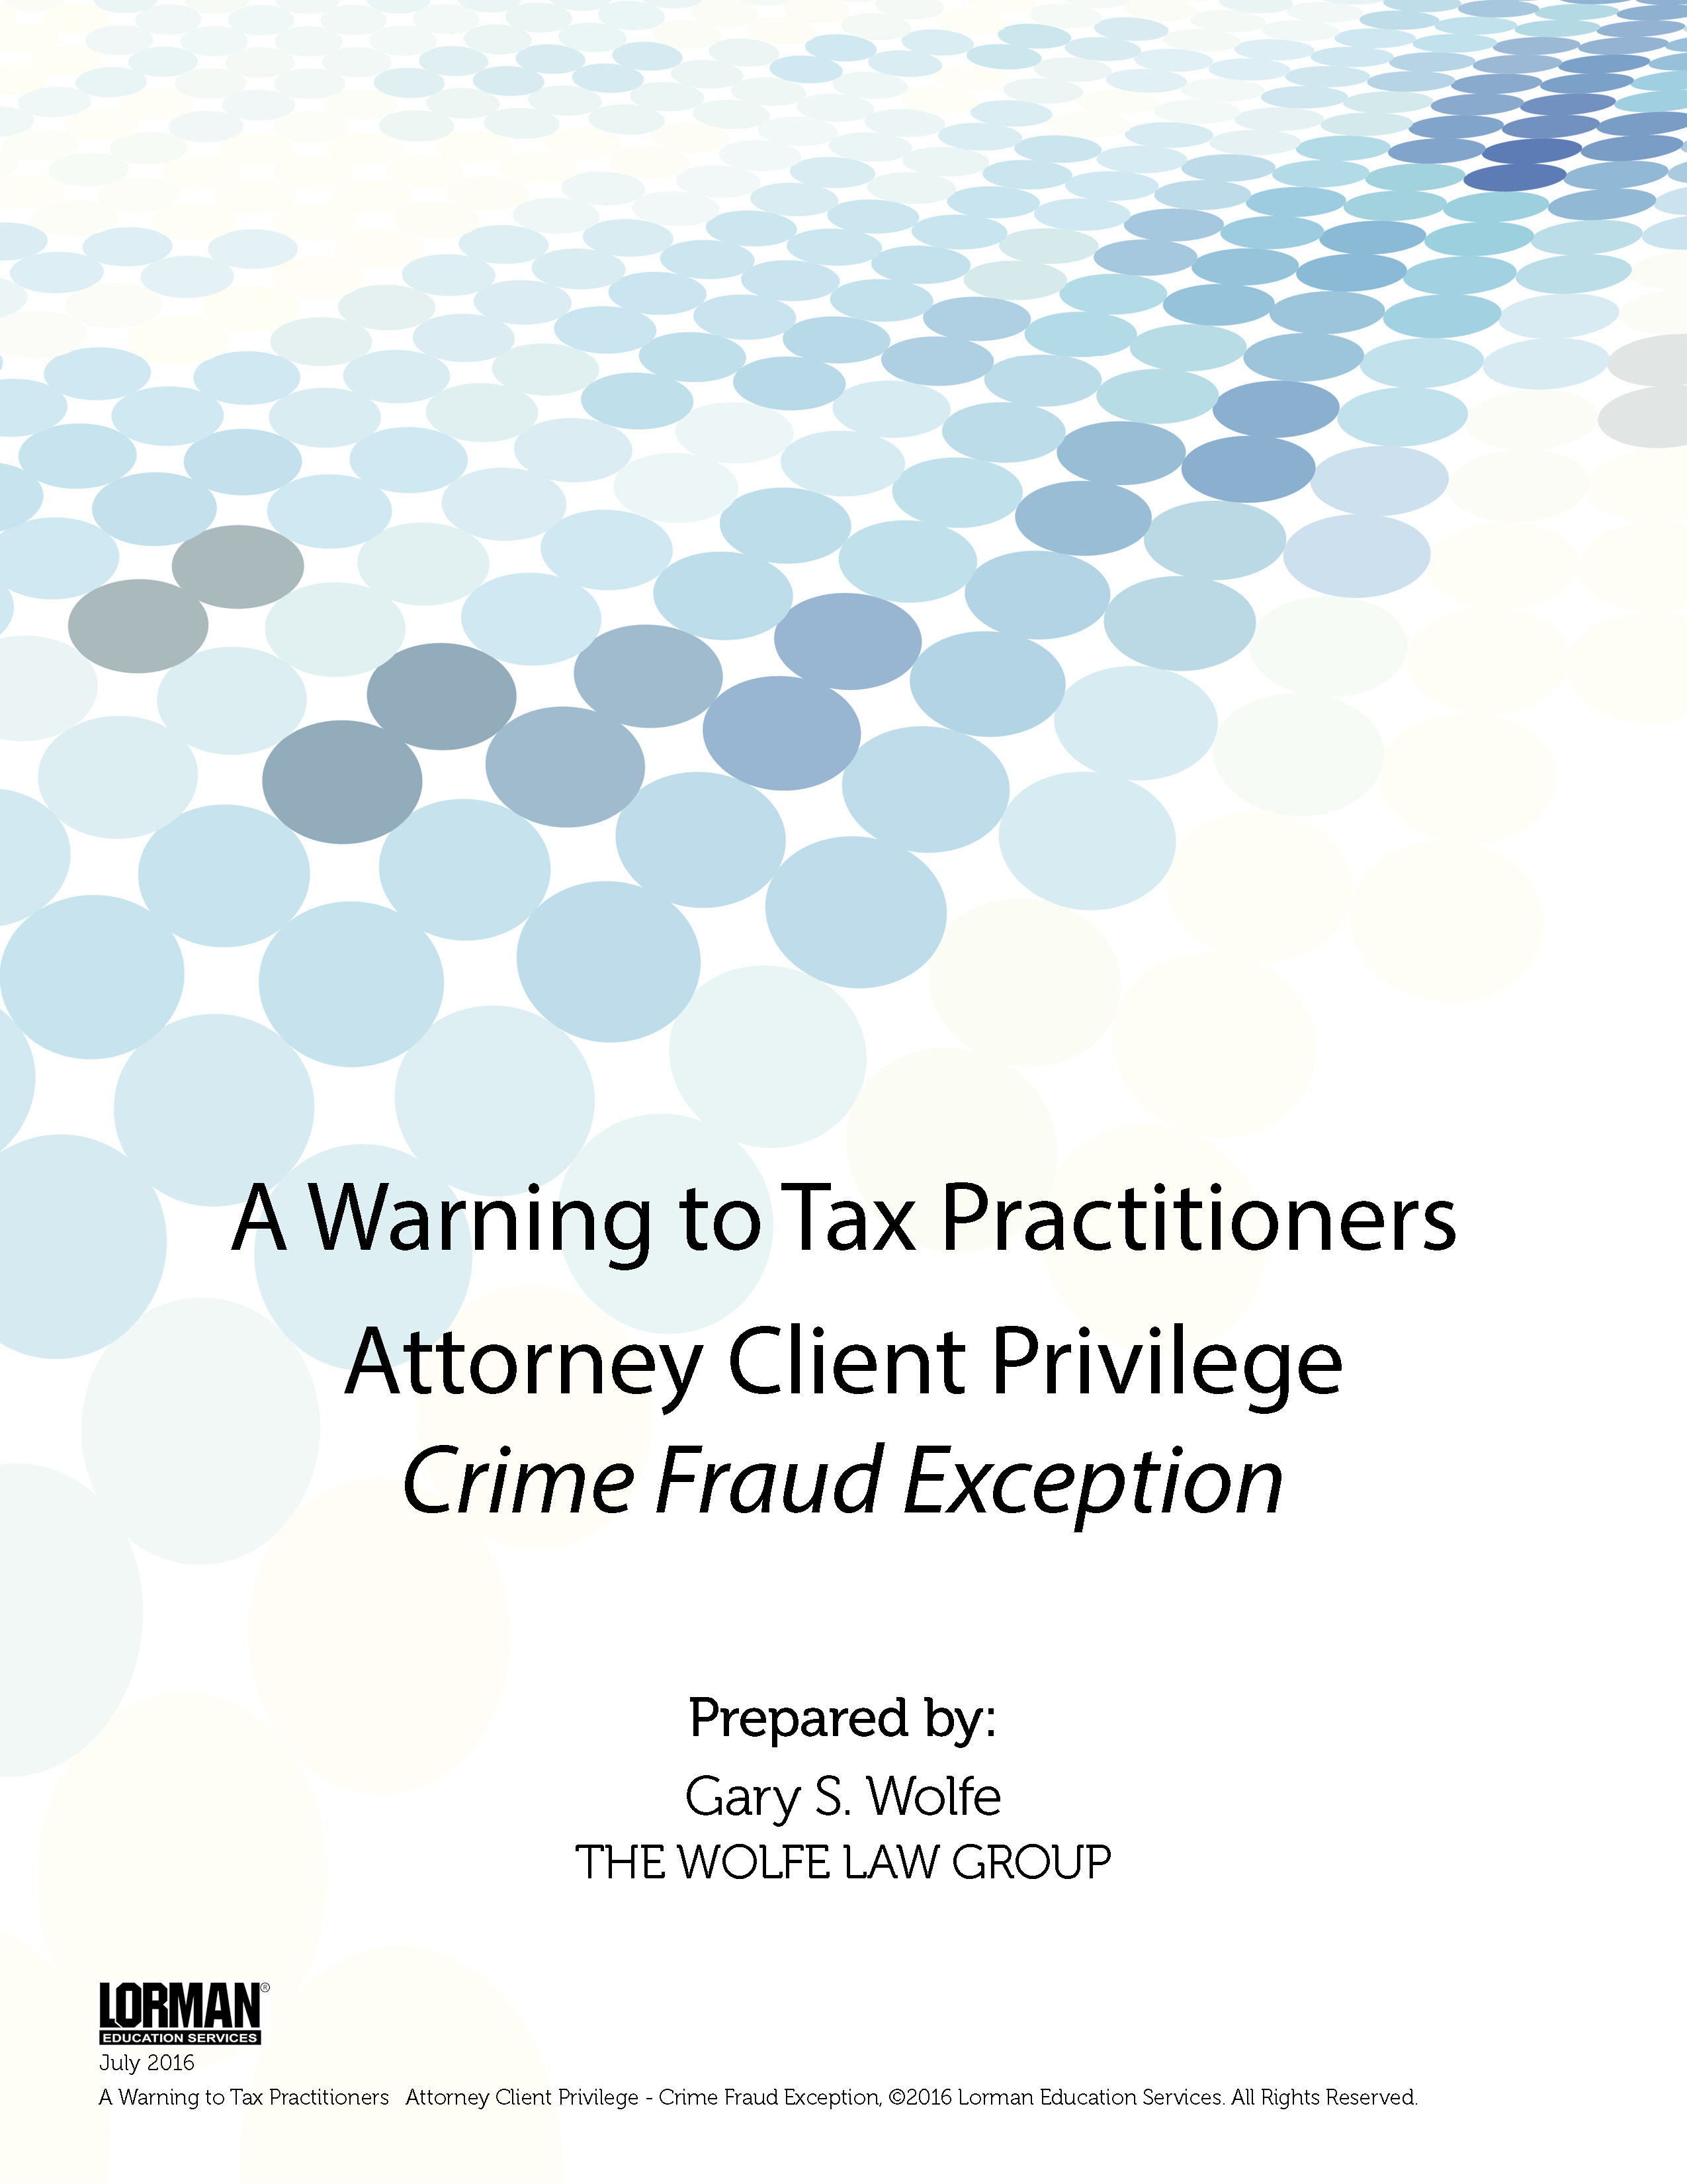 A Warning to Tax Practitioners and Attorney Client Privilege Crime Fraud Exception